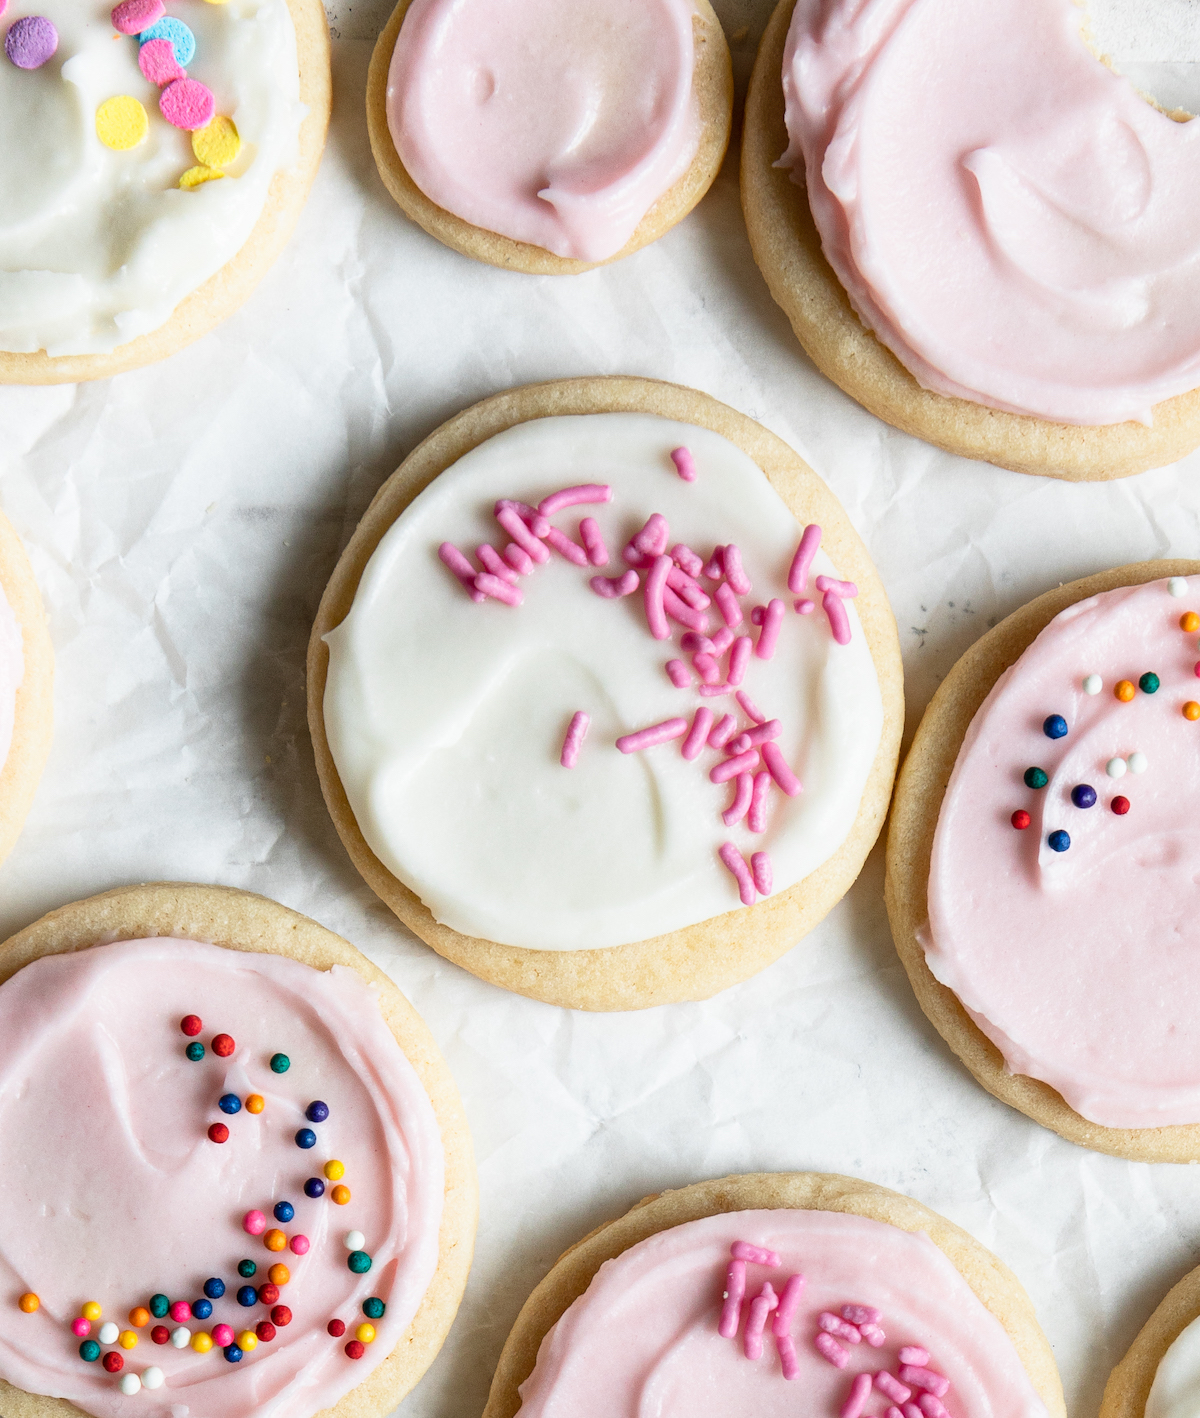 On a white surface, a bunch of sugar cookies with sprinkles.